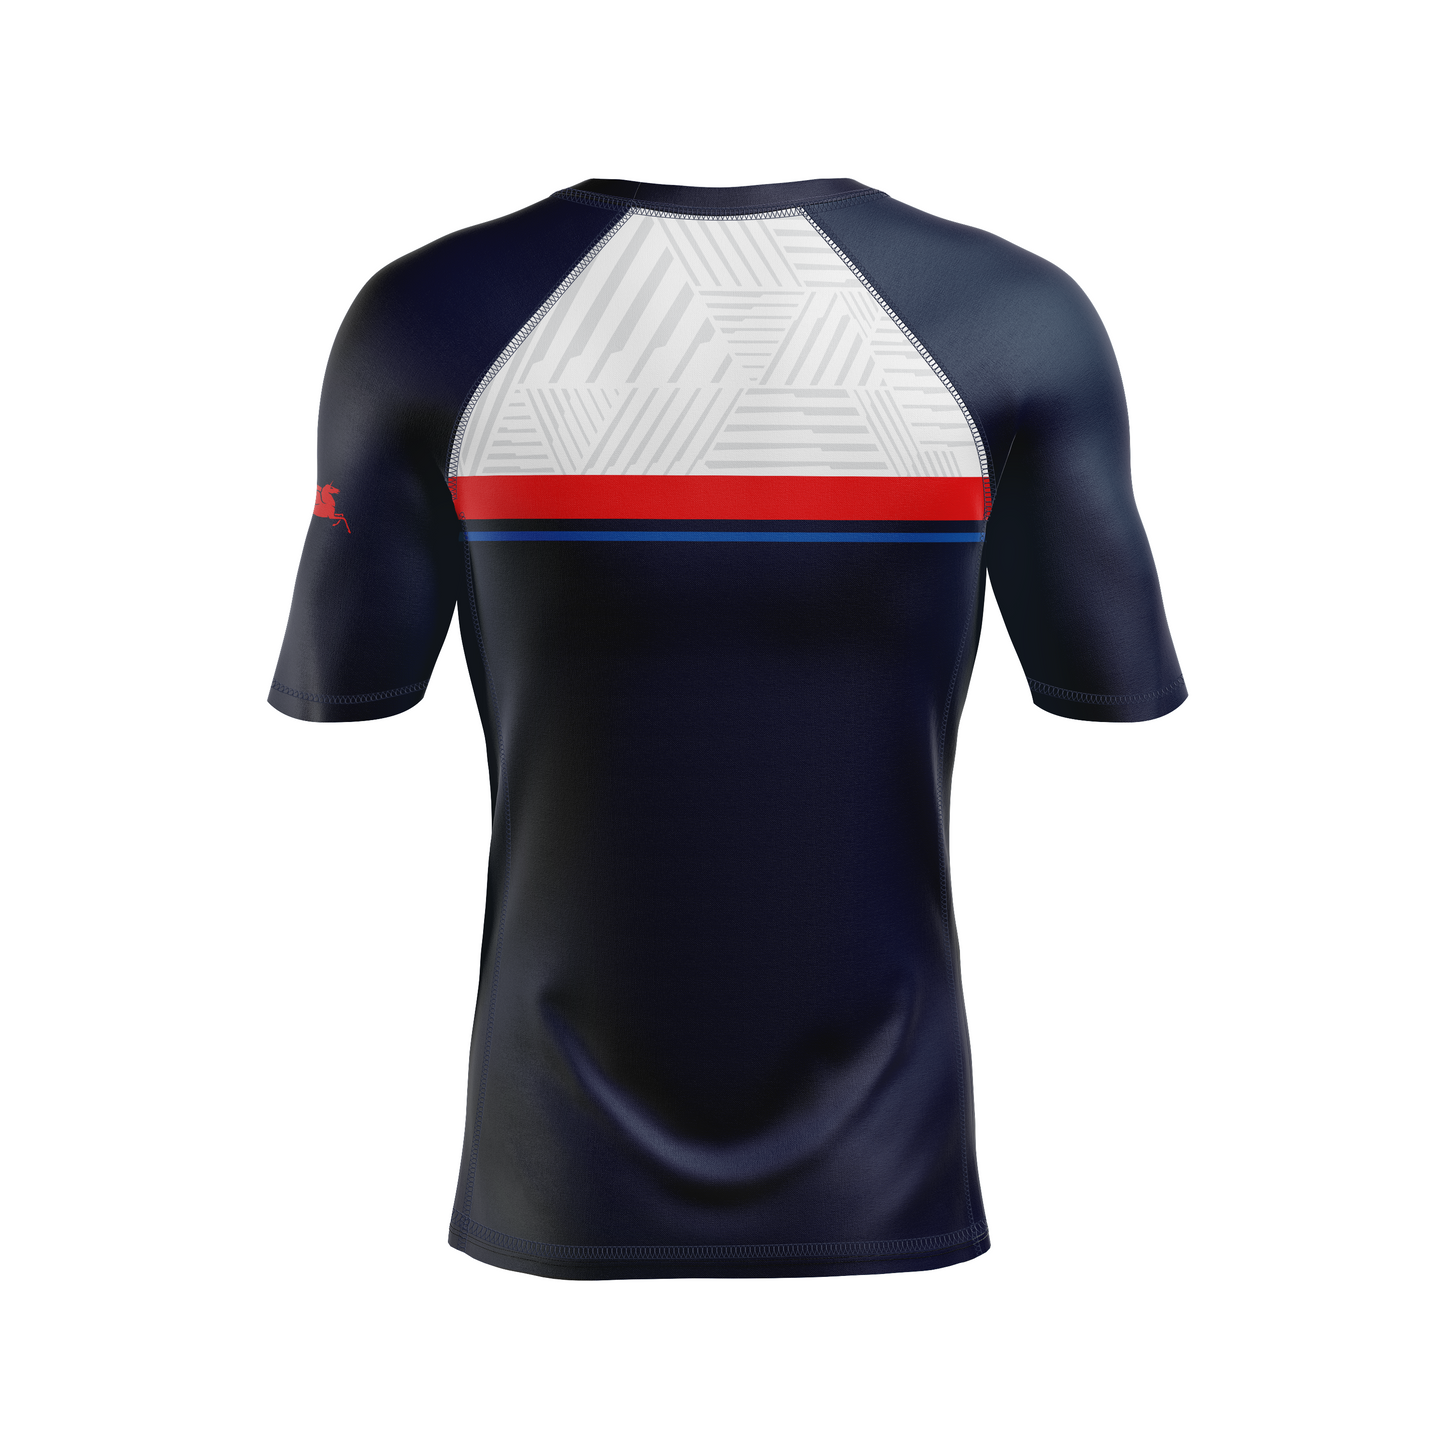 CCFC men's rash guard Enforcers, navy with red and white